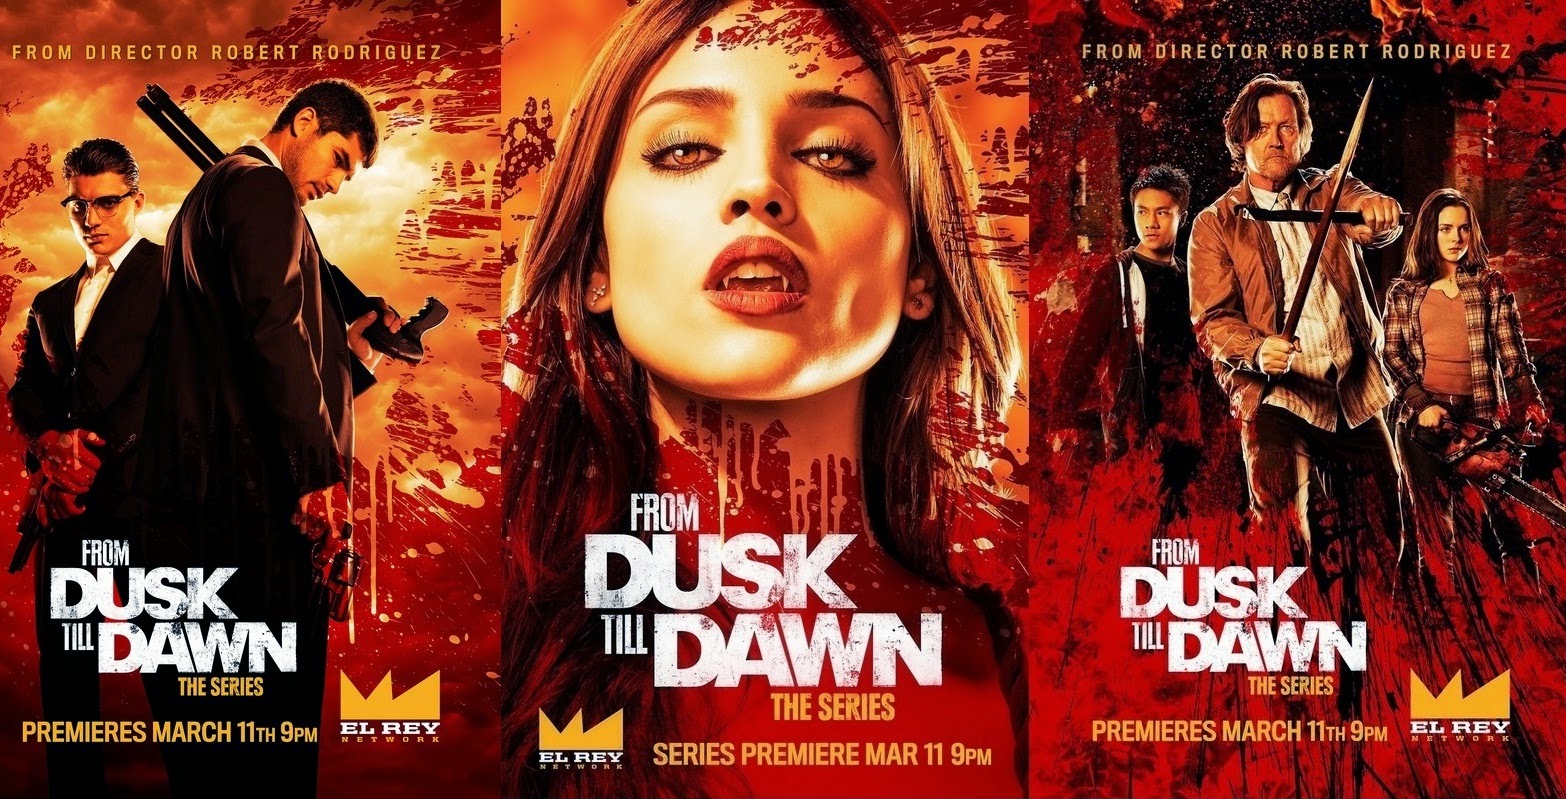 From Dusk Till Dawn: The Series #7